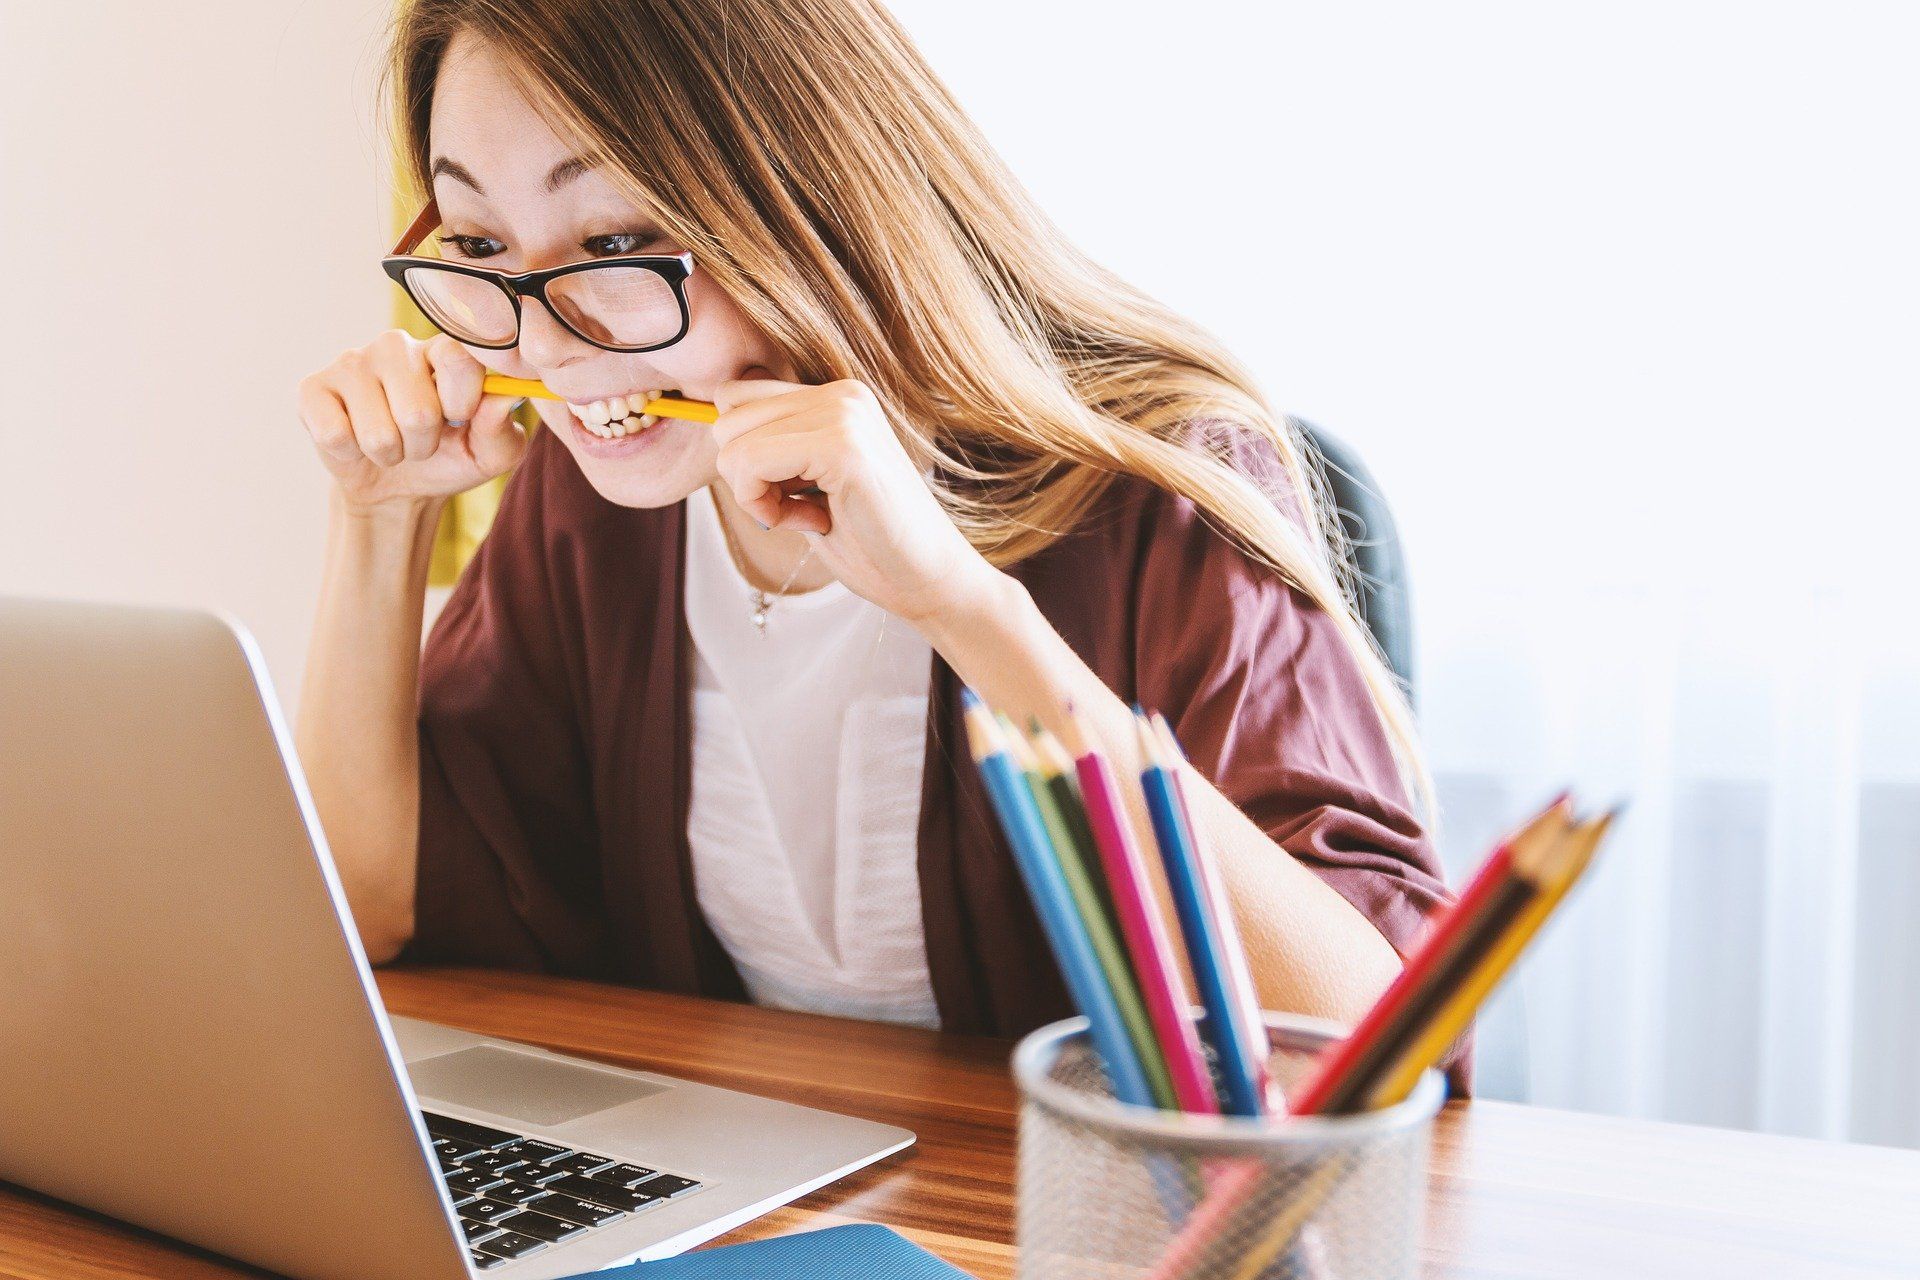 Girl focused on studying chewing on pencil in front of laptop